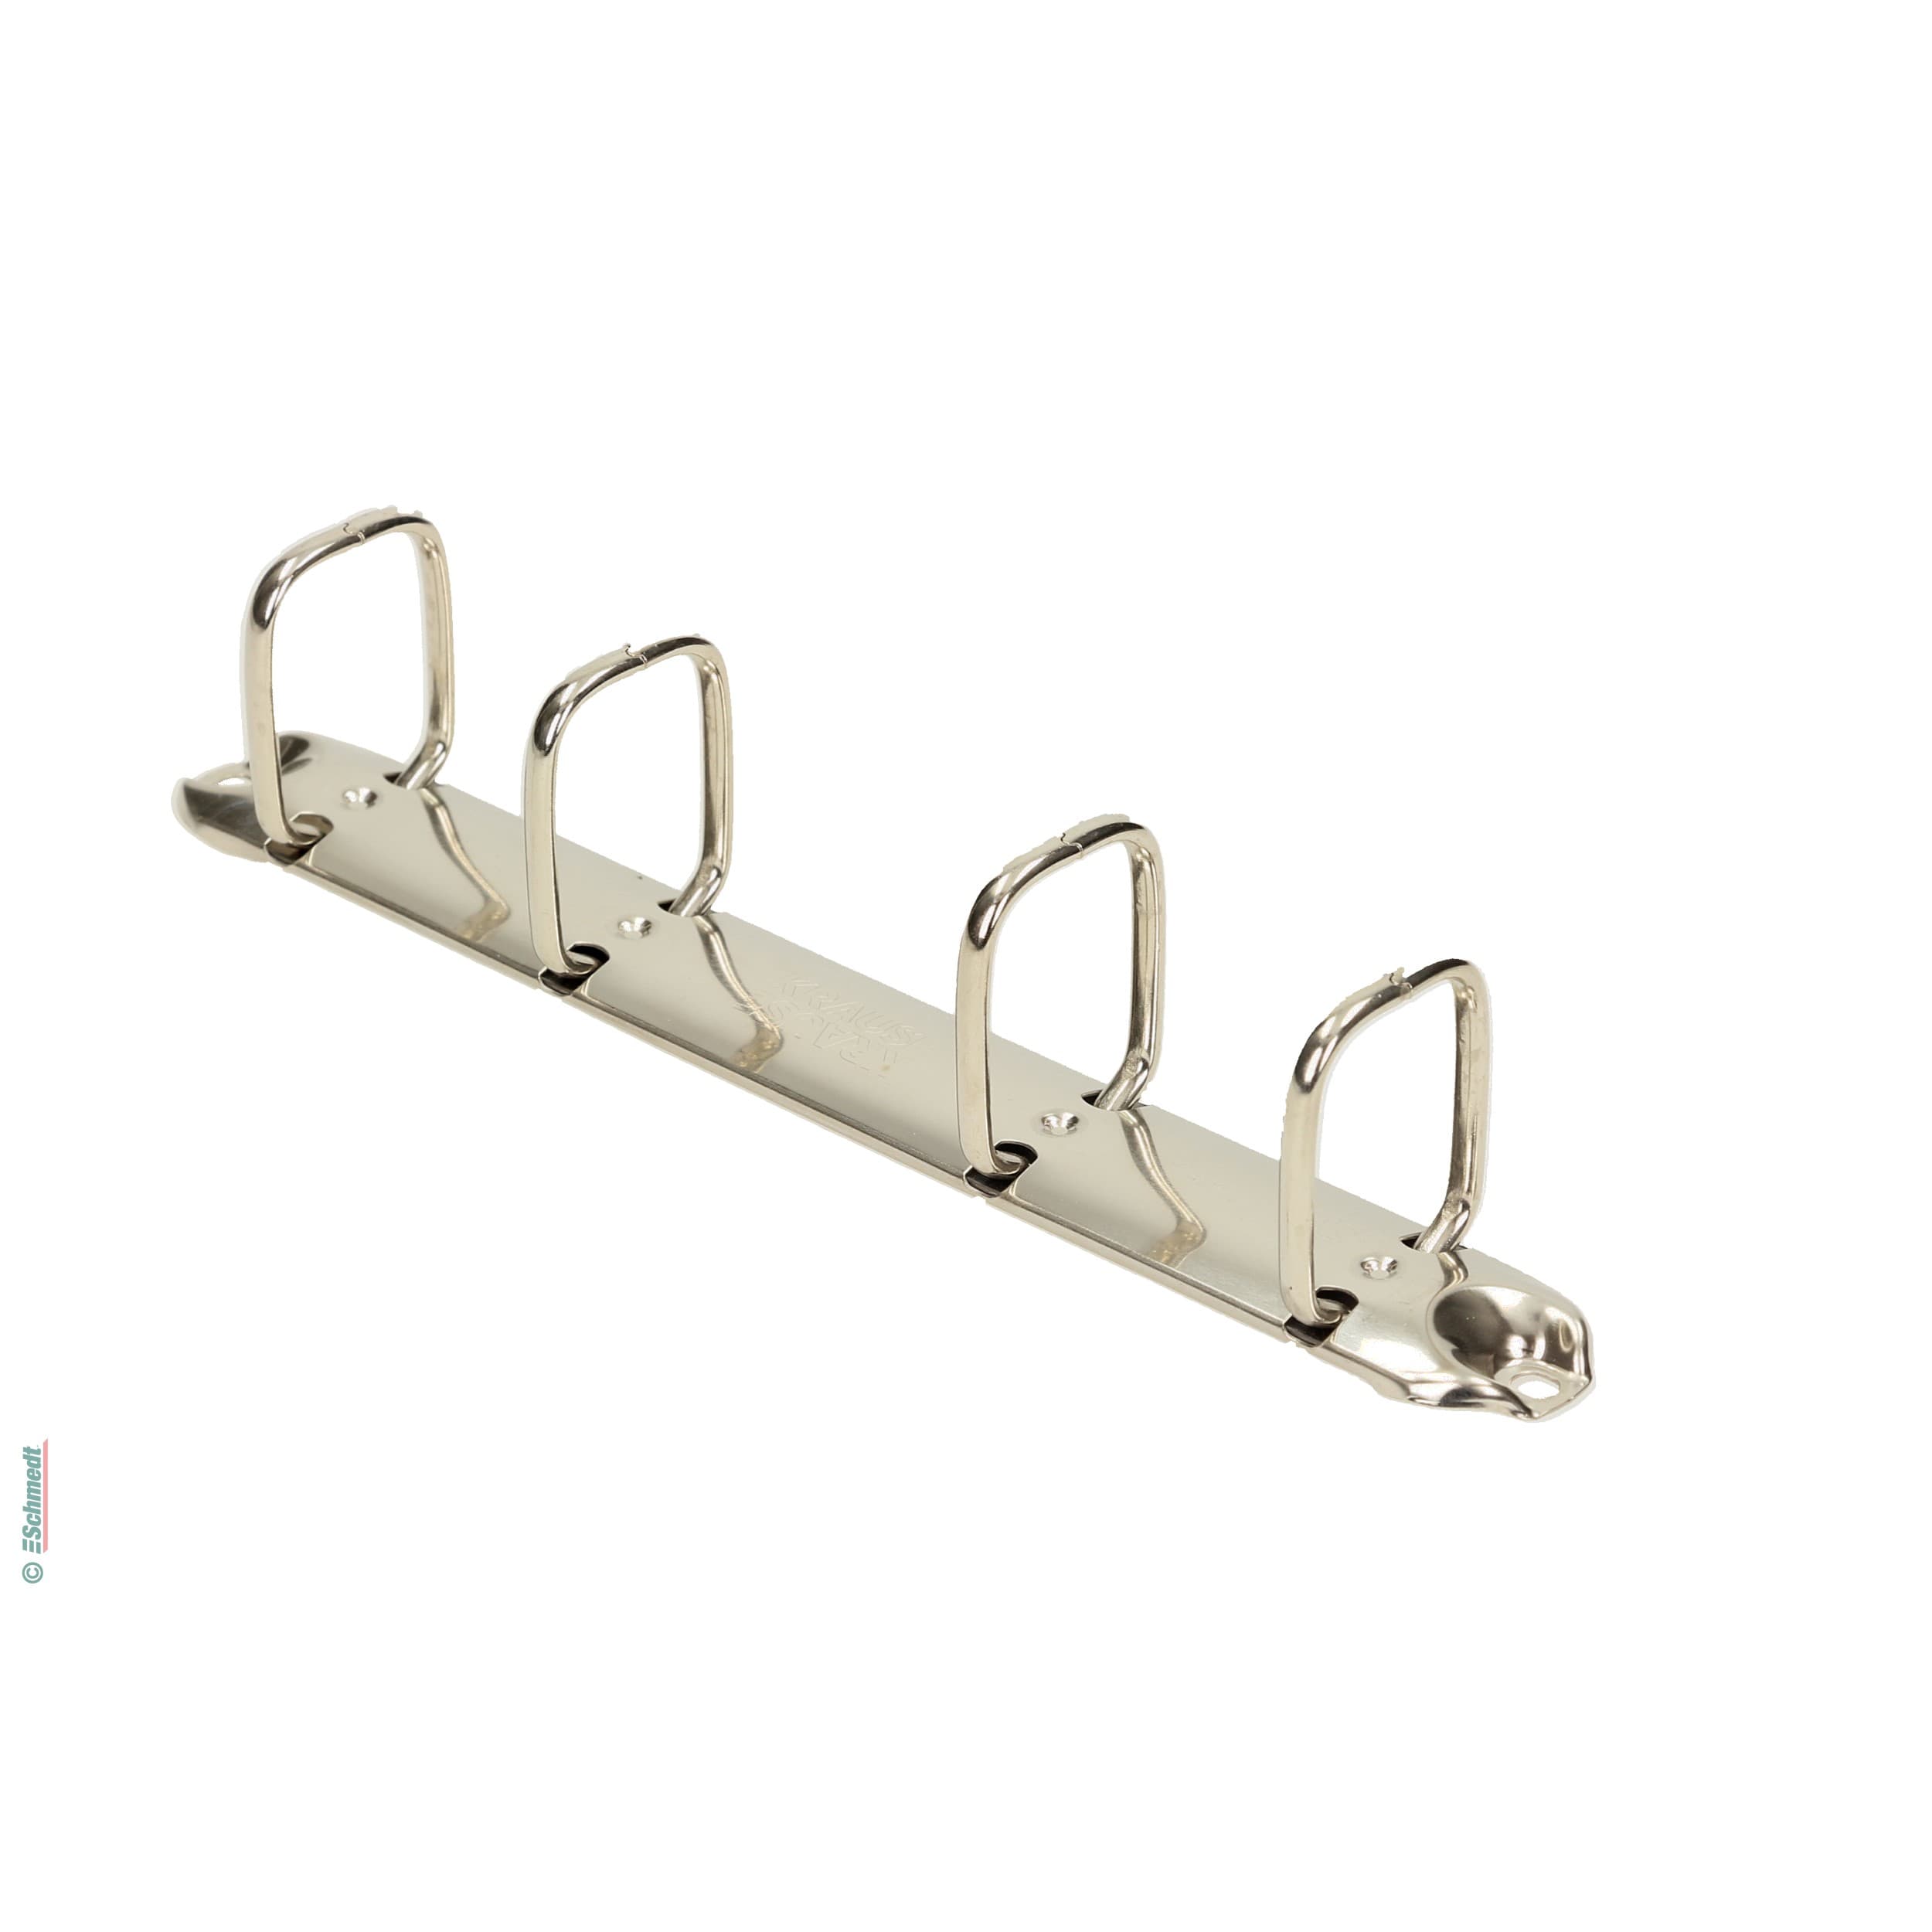 Arch-type mechanism Standard B - with 4 arches with distance: 45 - 65 - 45 mm [A5] - for the production of ring binders and file folders... - image-1